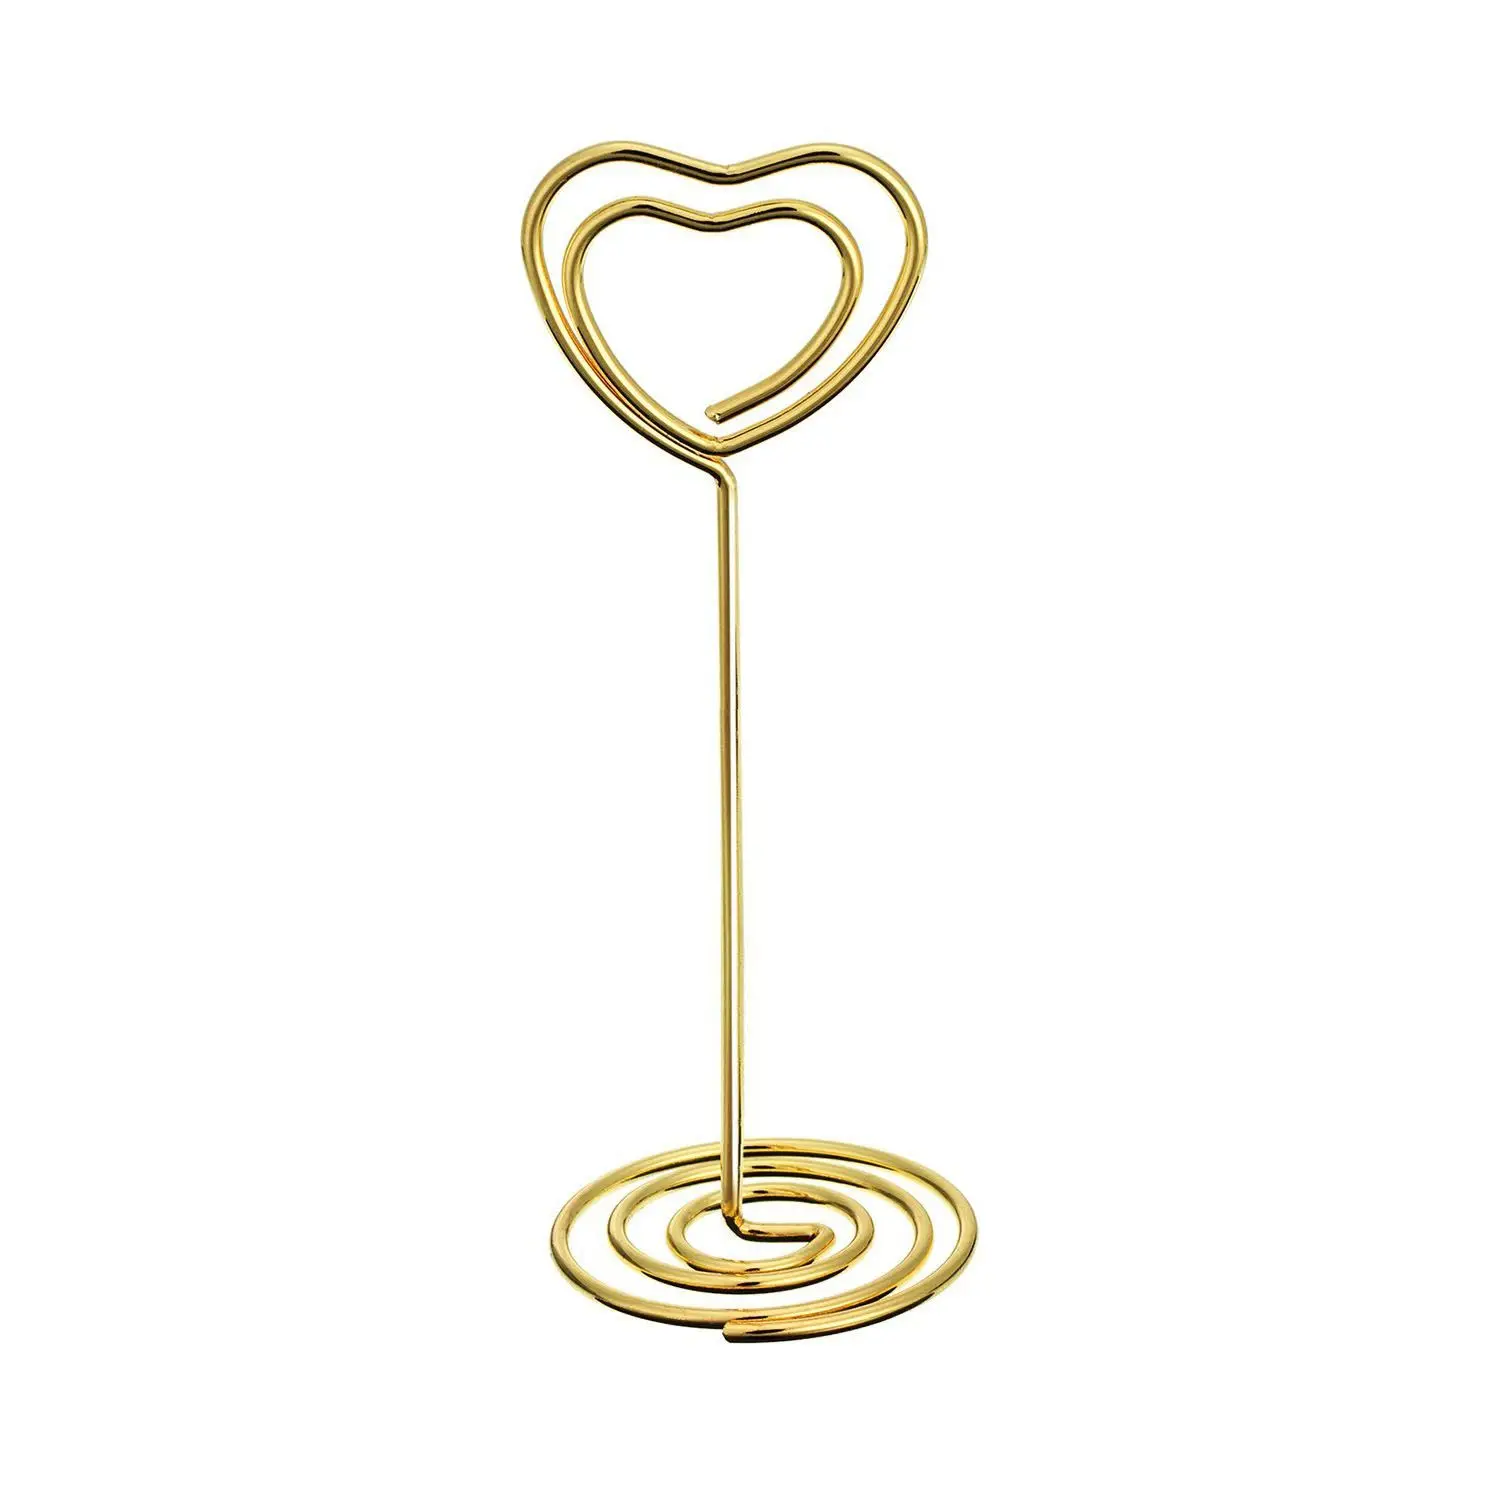 HOT-24 Pack of Table Number Card Holders Photo Holder Stand Place Card Paper Menu Clips Holders, Gold Heart Shape